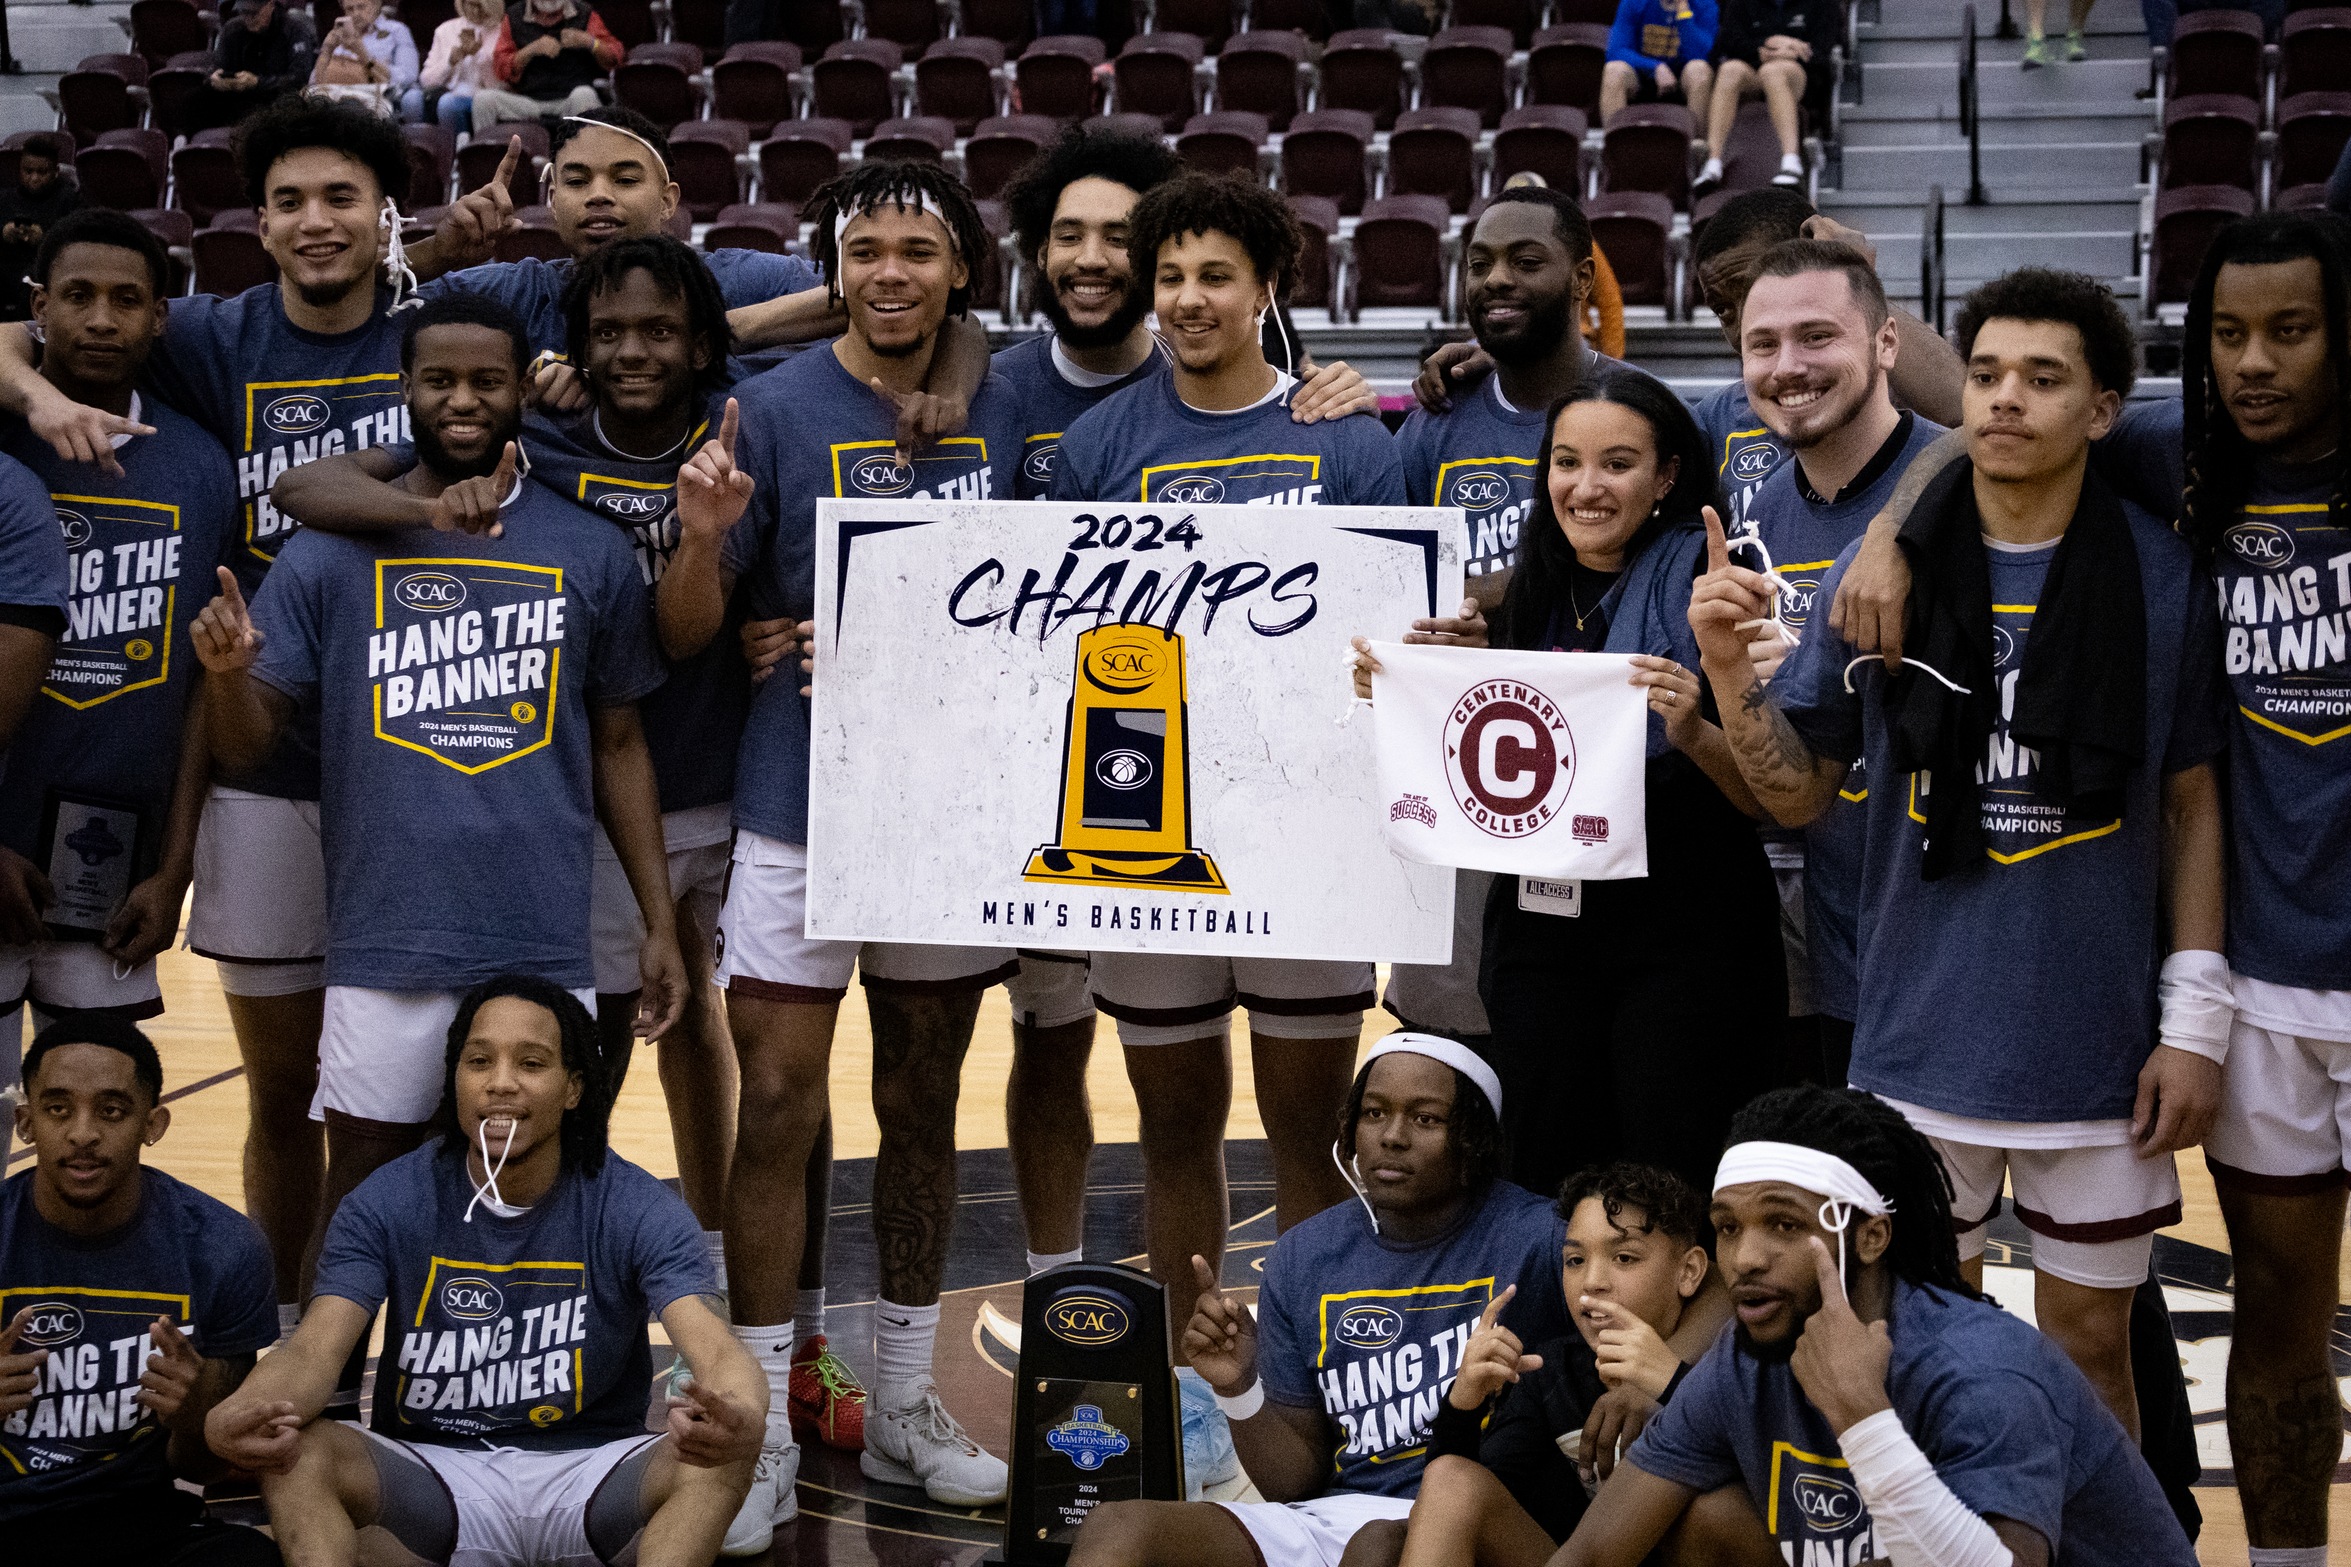 CHAMPS! Gents Take Down Tigers to Win SCAC Tournament Title And Secure NCAA Berth